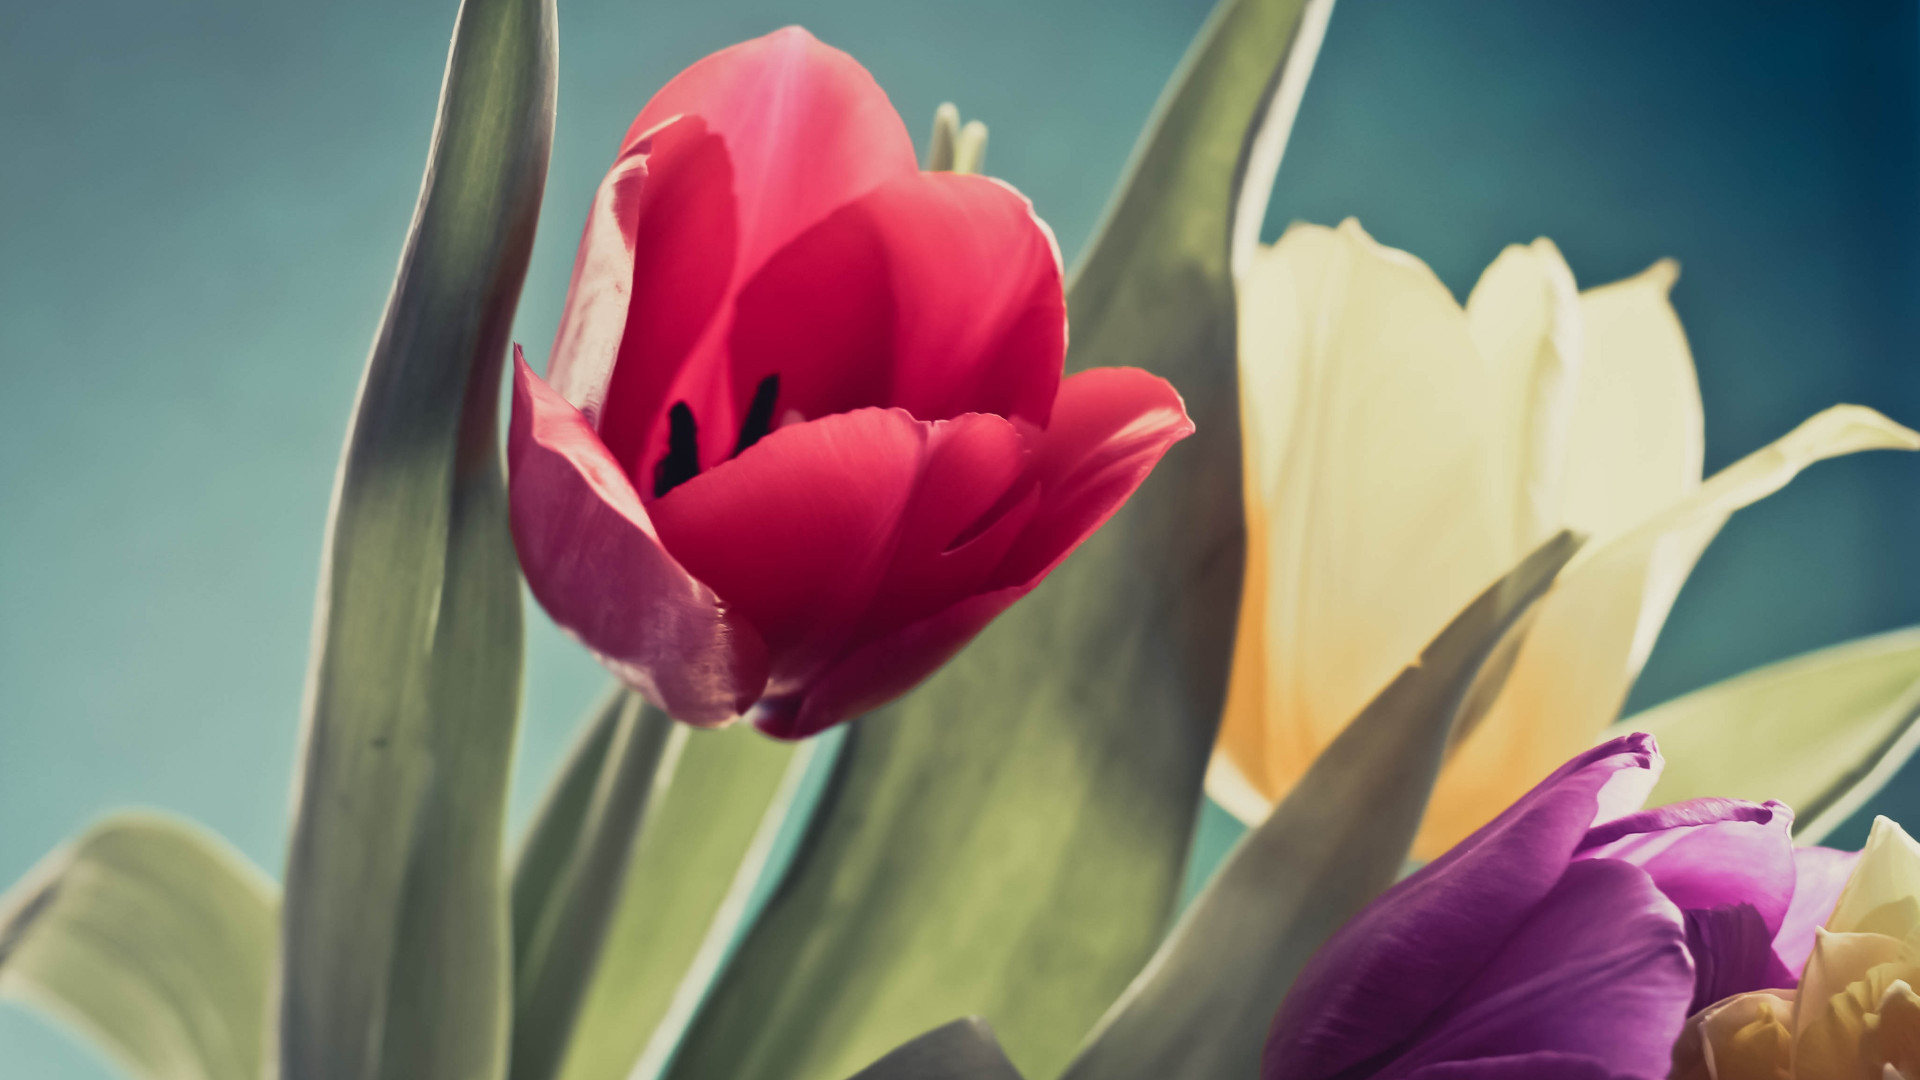 Red, purple and yellow tulips wallpaper 1920x1080